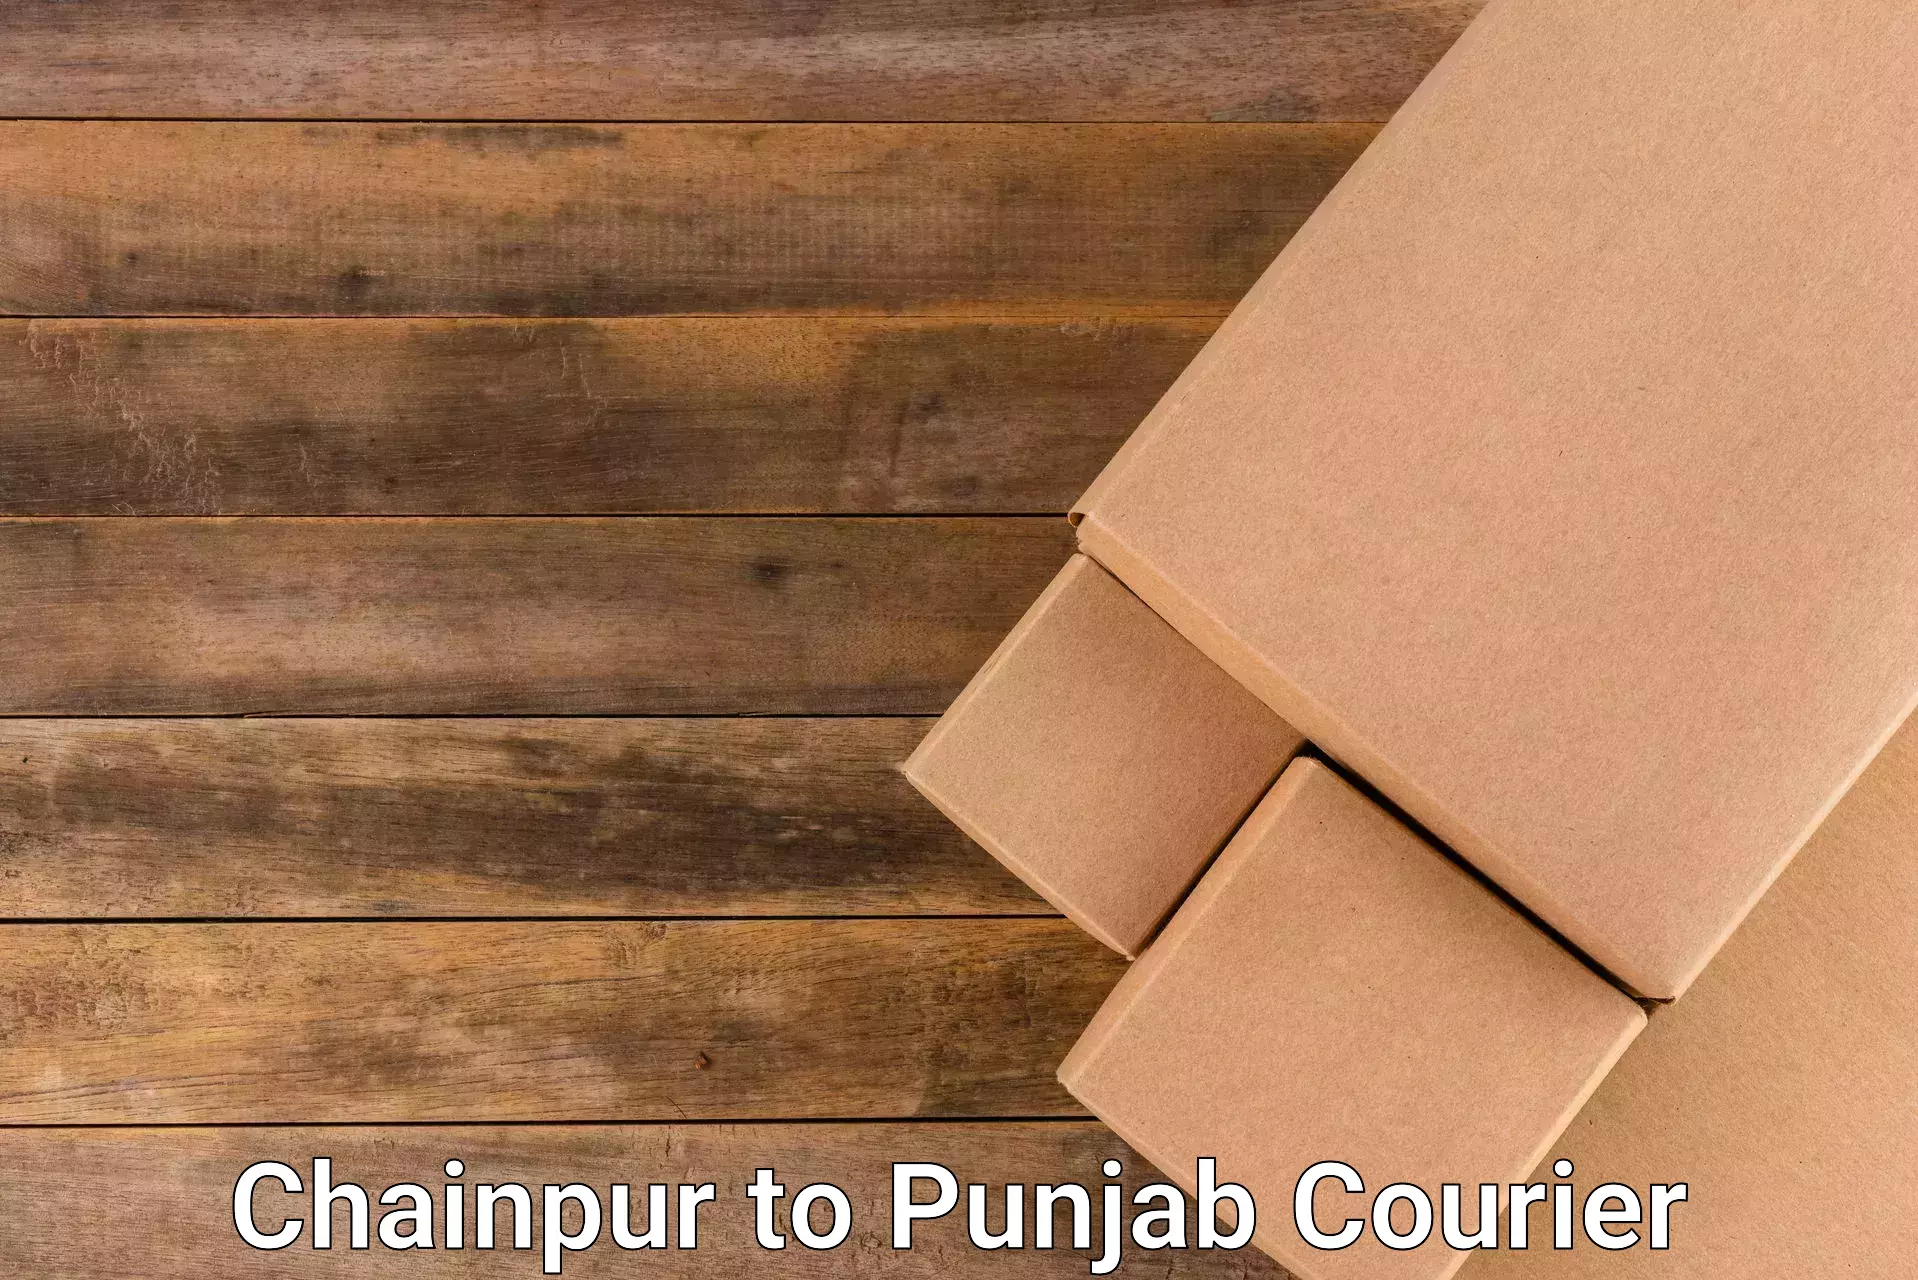 Subscription-based courier Chainpur to Jalalabad